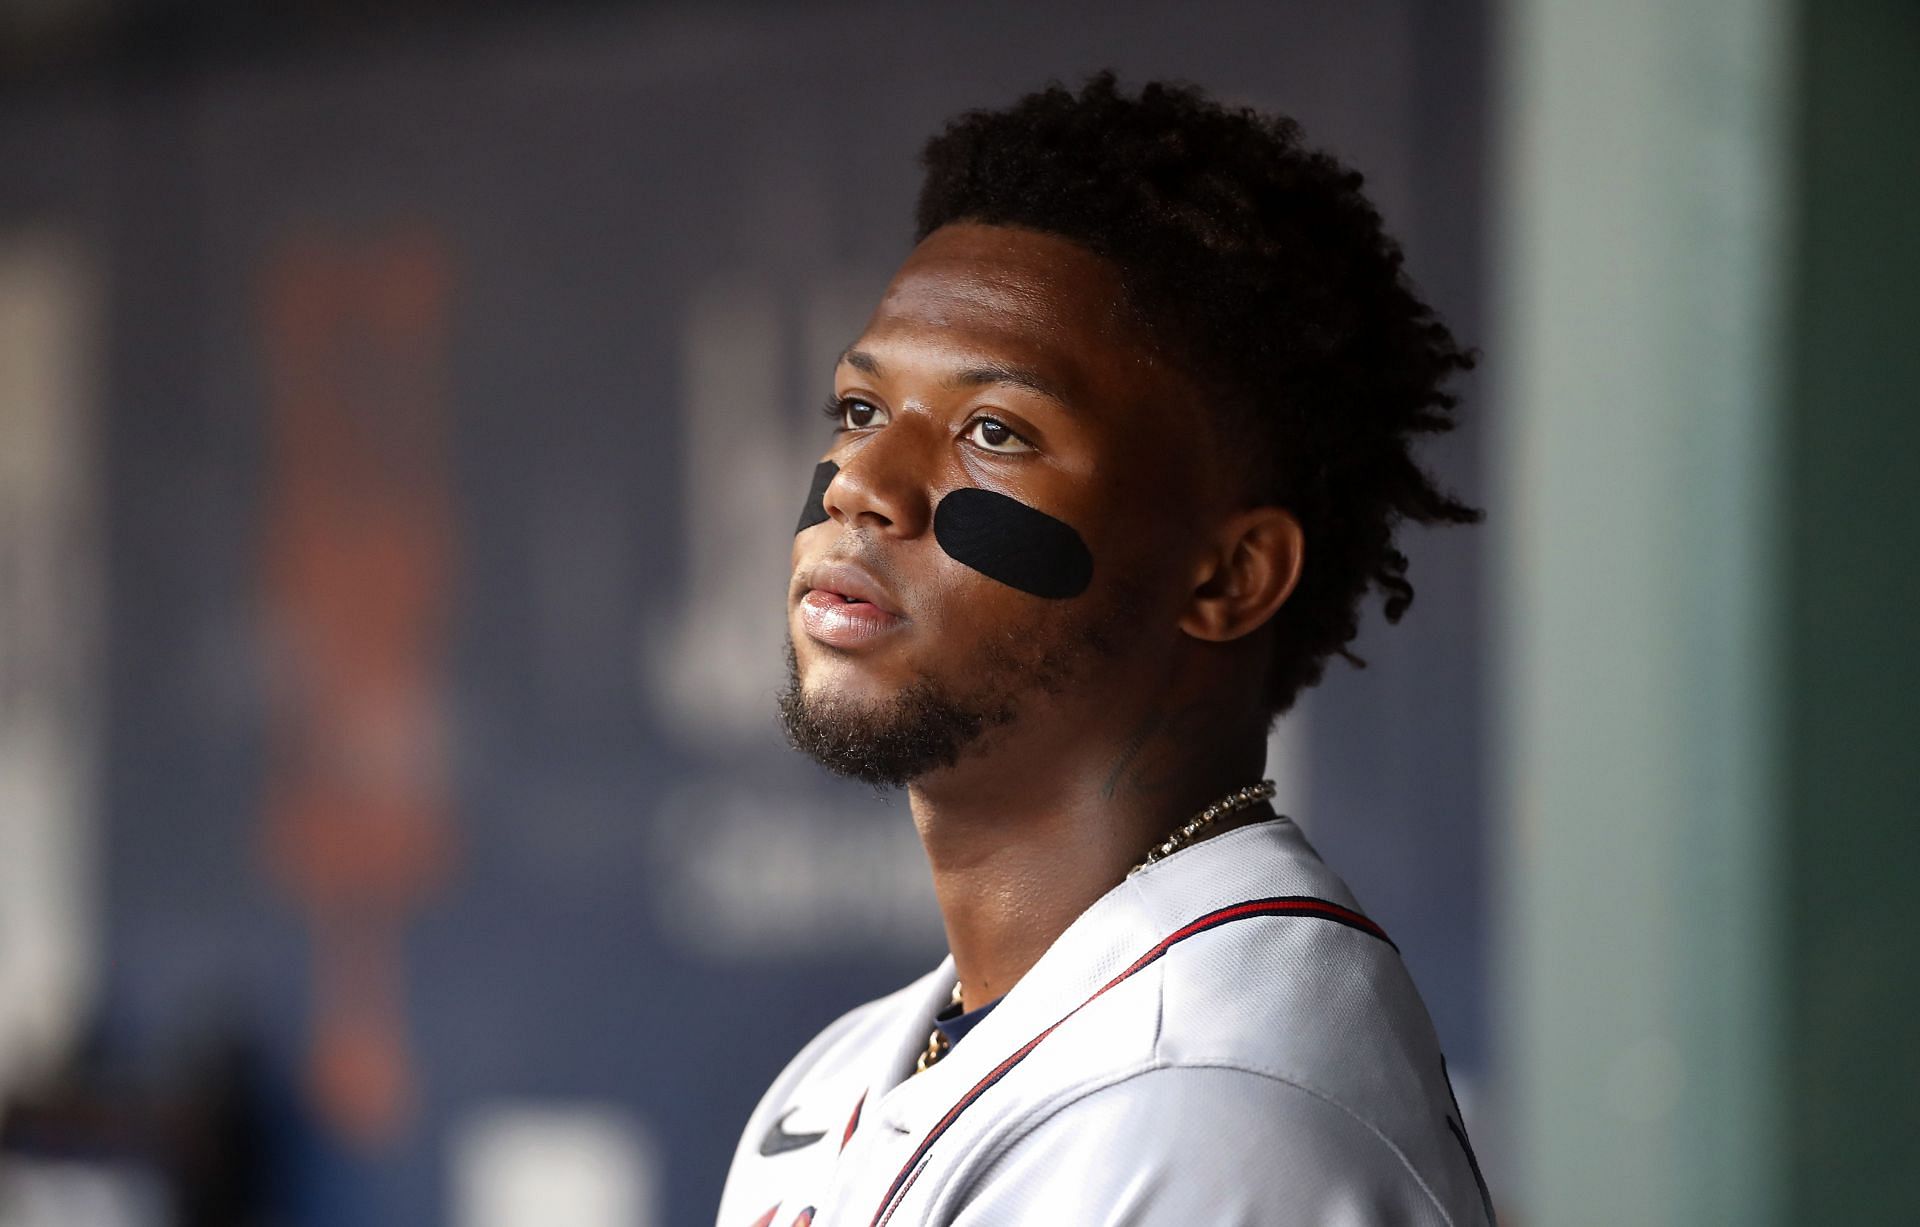 Ronald Acuna Jr. looks on during the loss